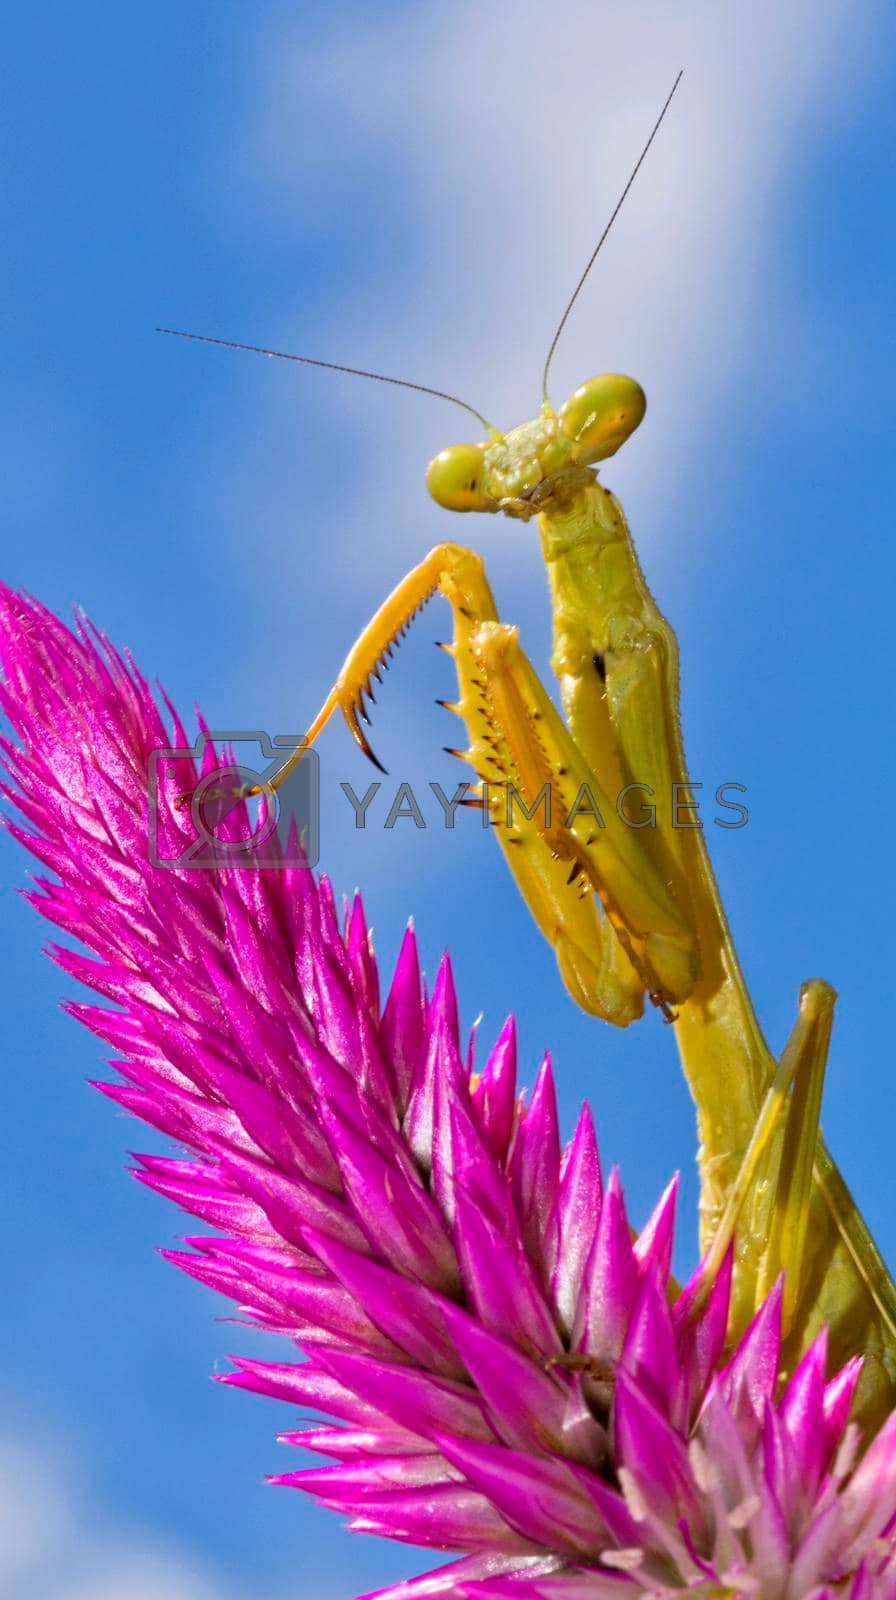 Royalty free image of Praying Mantis, Tropical Rainforest, Costa Rica  by alcaproac